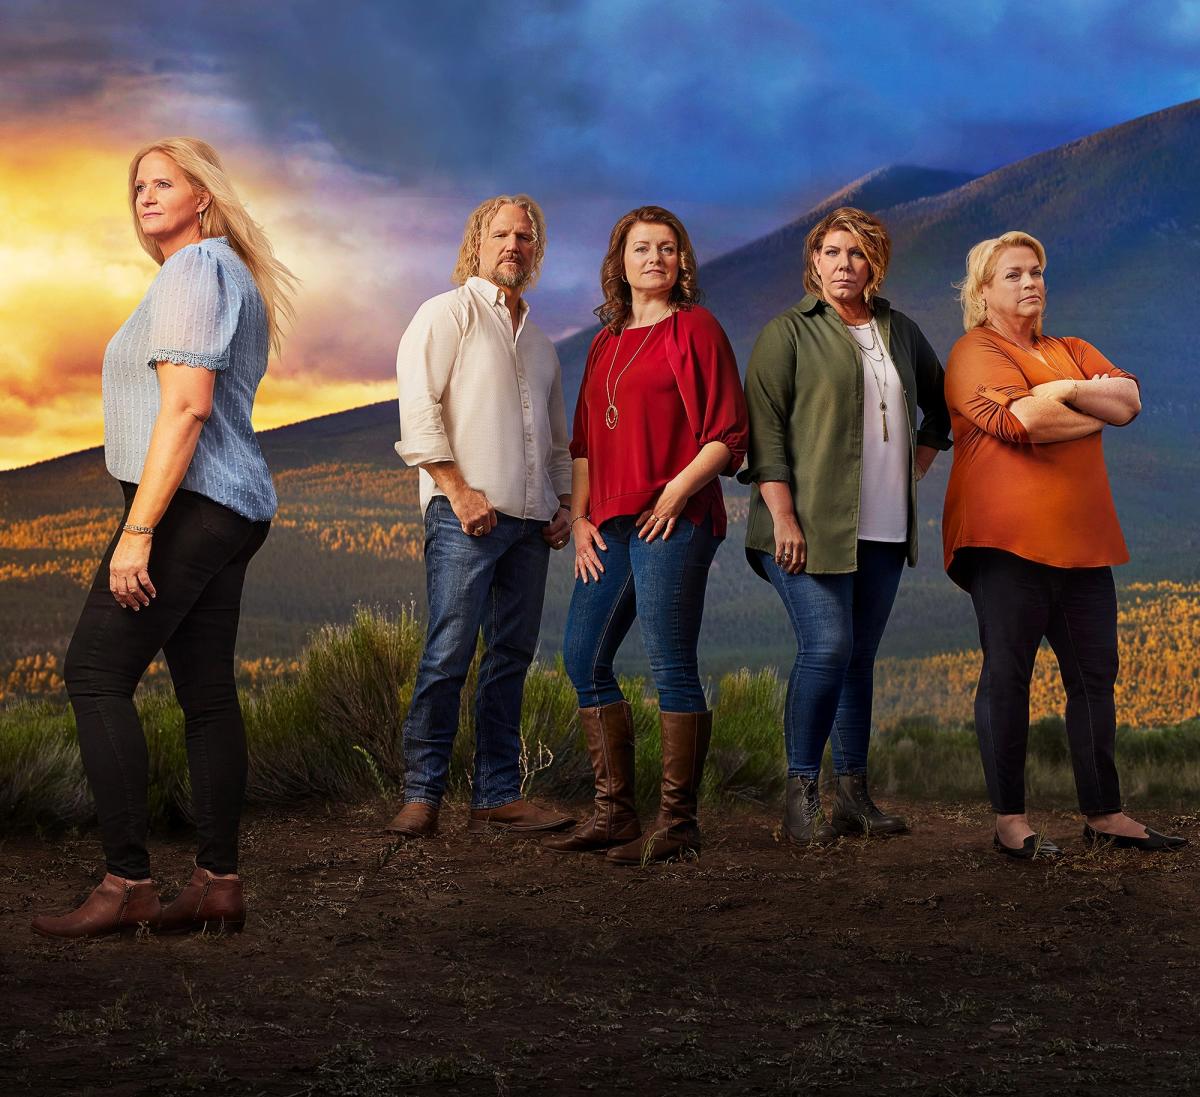 Sister Wives’ season 18 premiere: How to watch, where to live stream